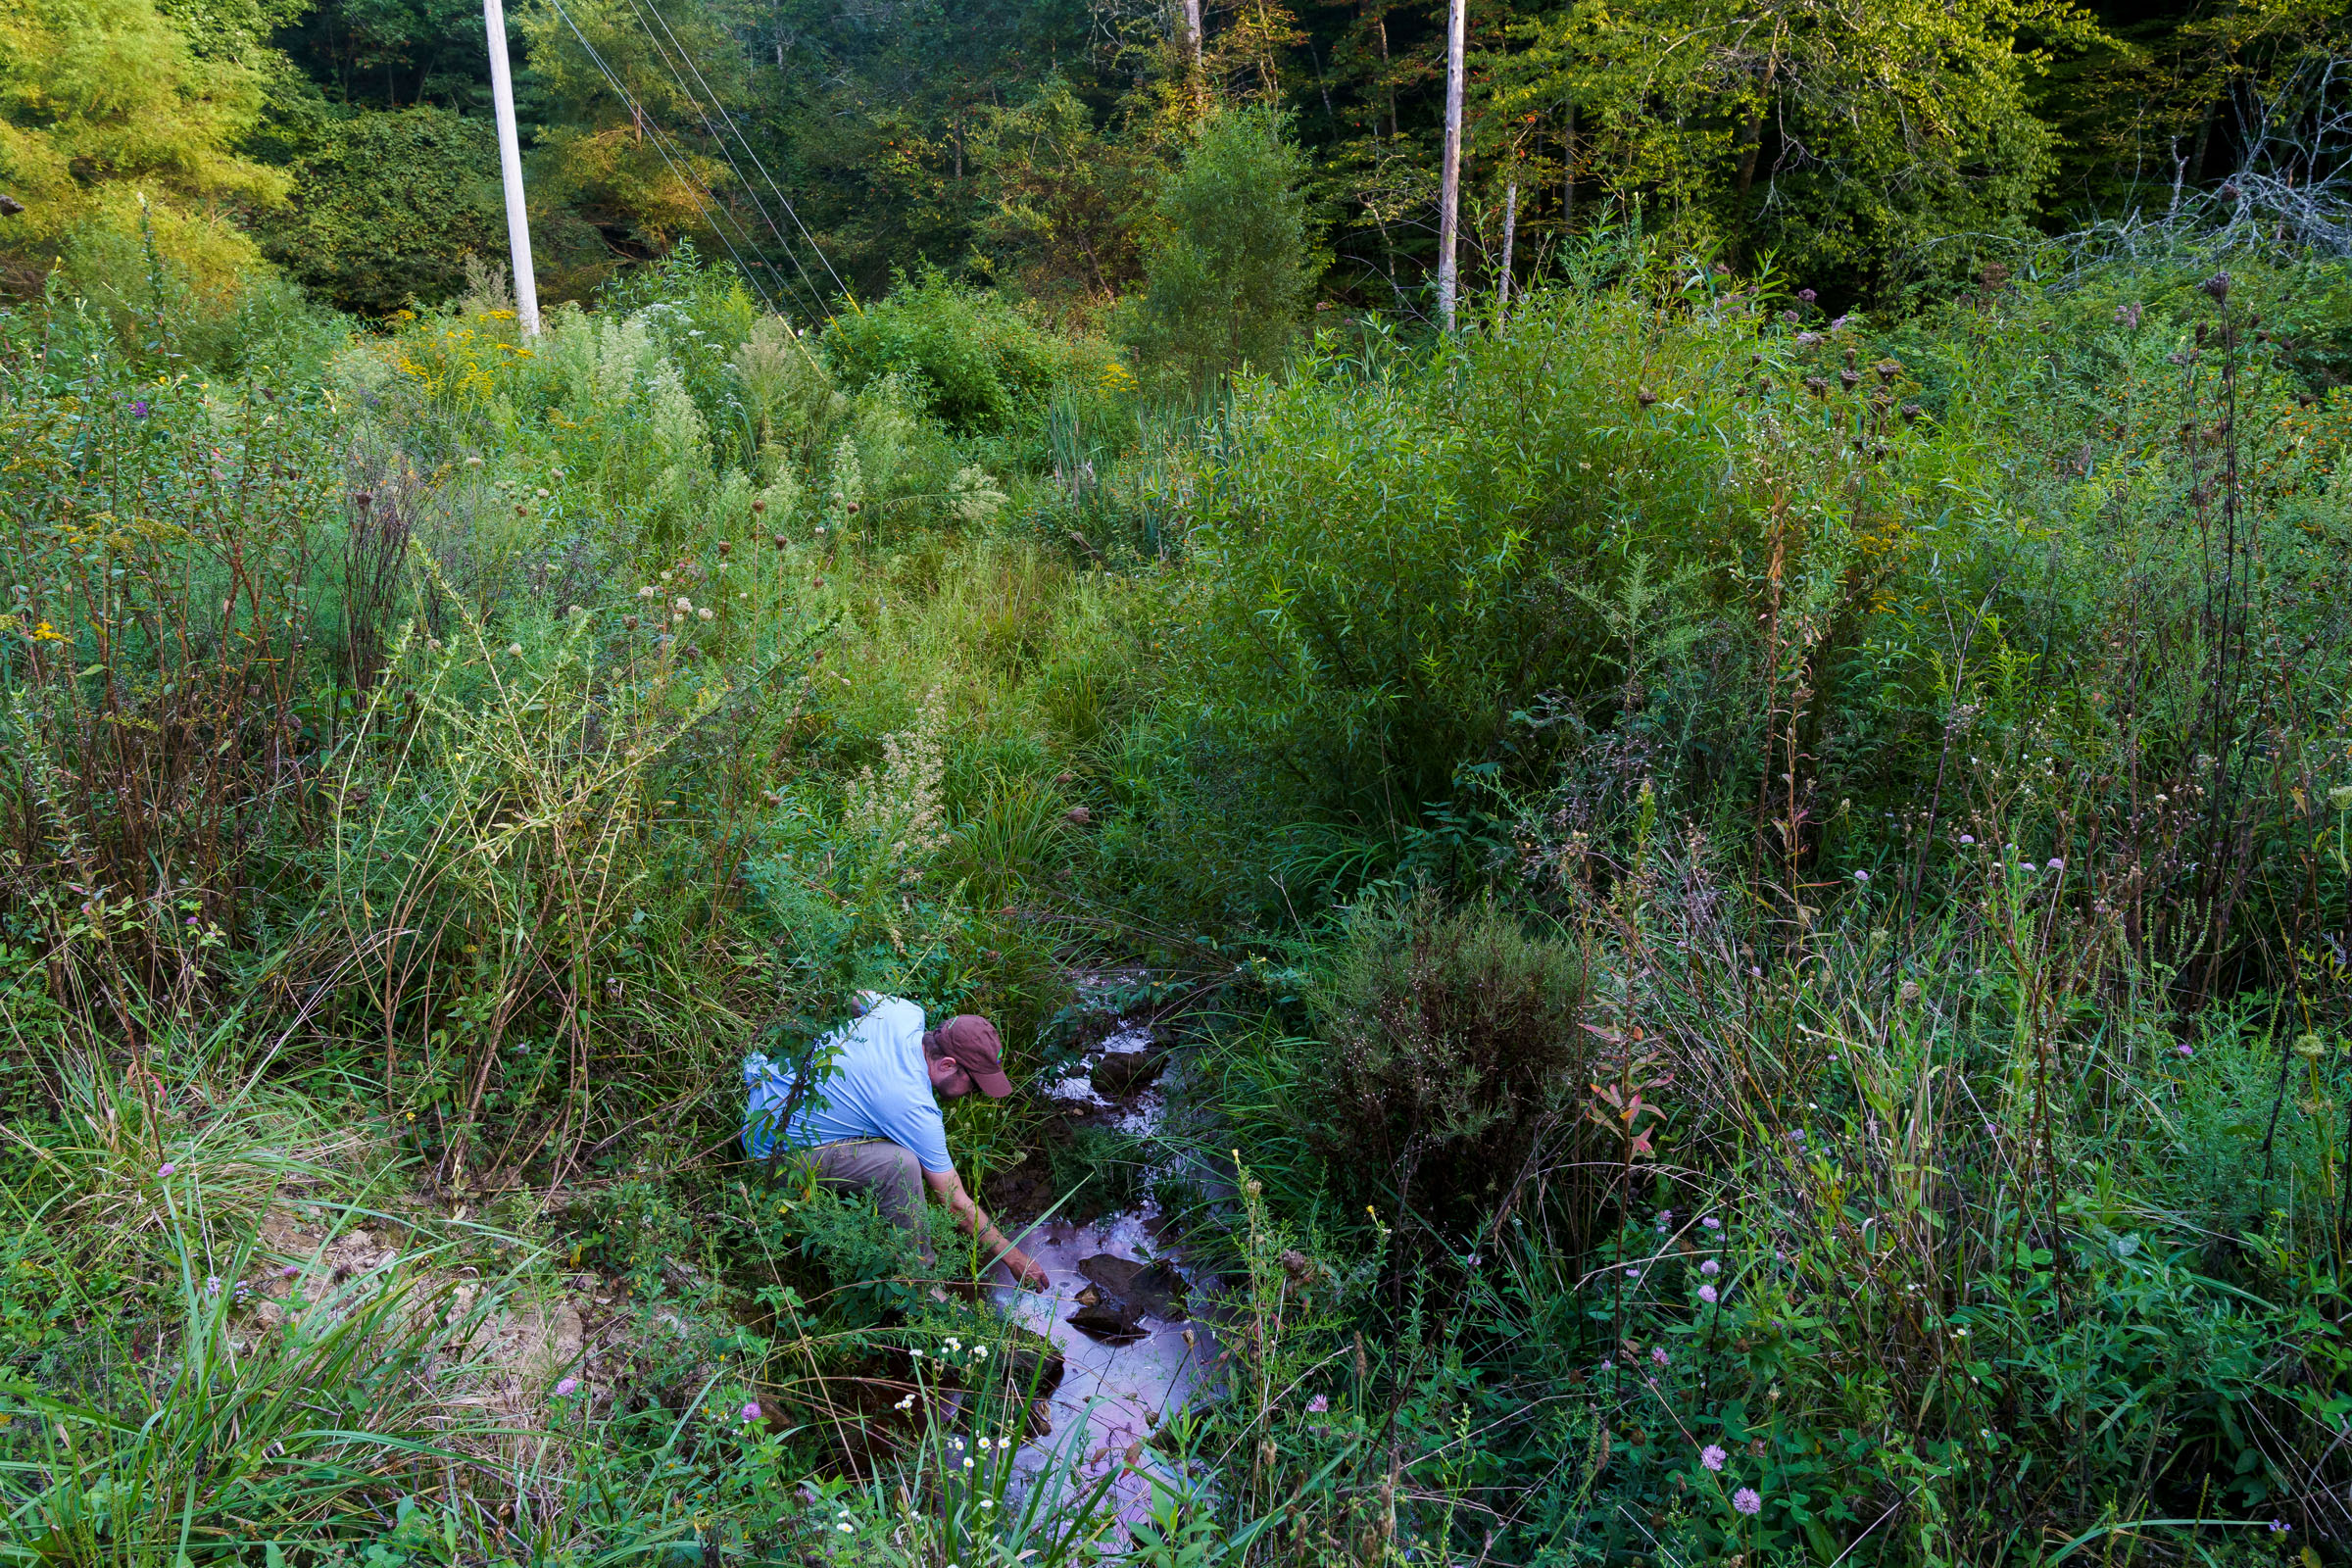 Willie Dodson of Appalachian Voices tests for heavy metals in a small stream below a coal mine in Salyerville, Kentucky on September 7, 2023. Photo by Michael Swensen For Earth Justice